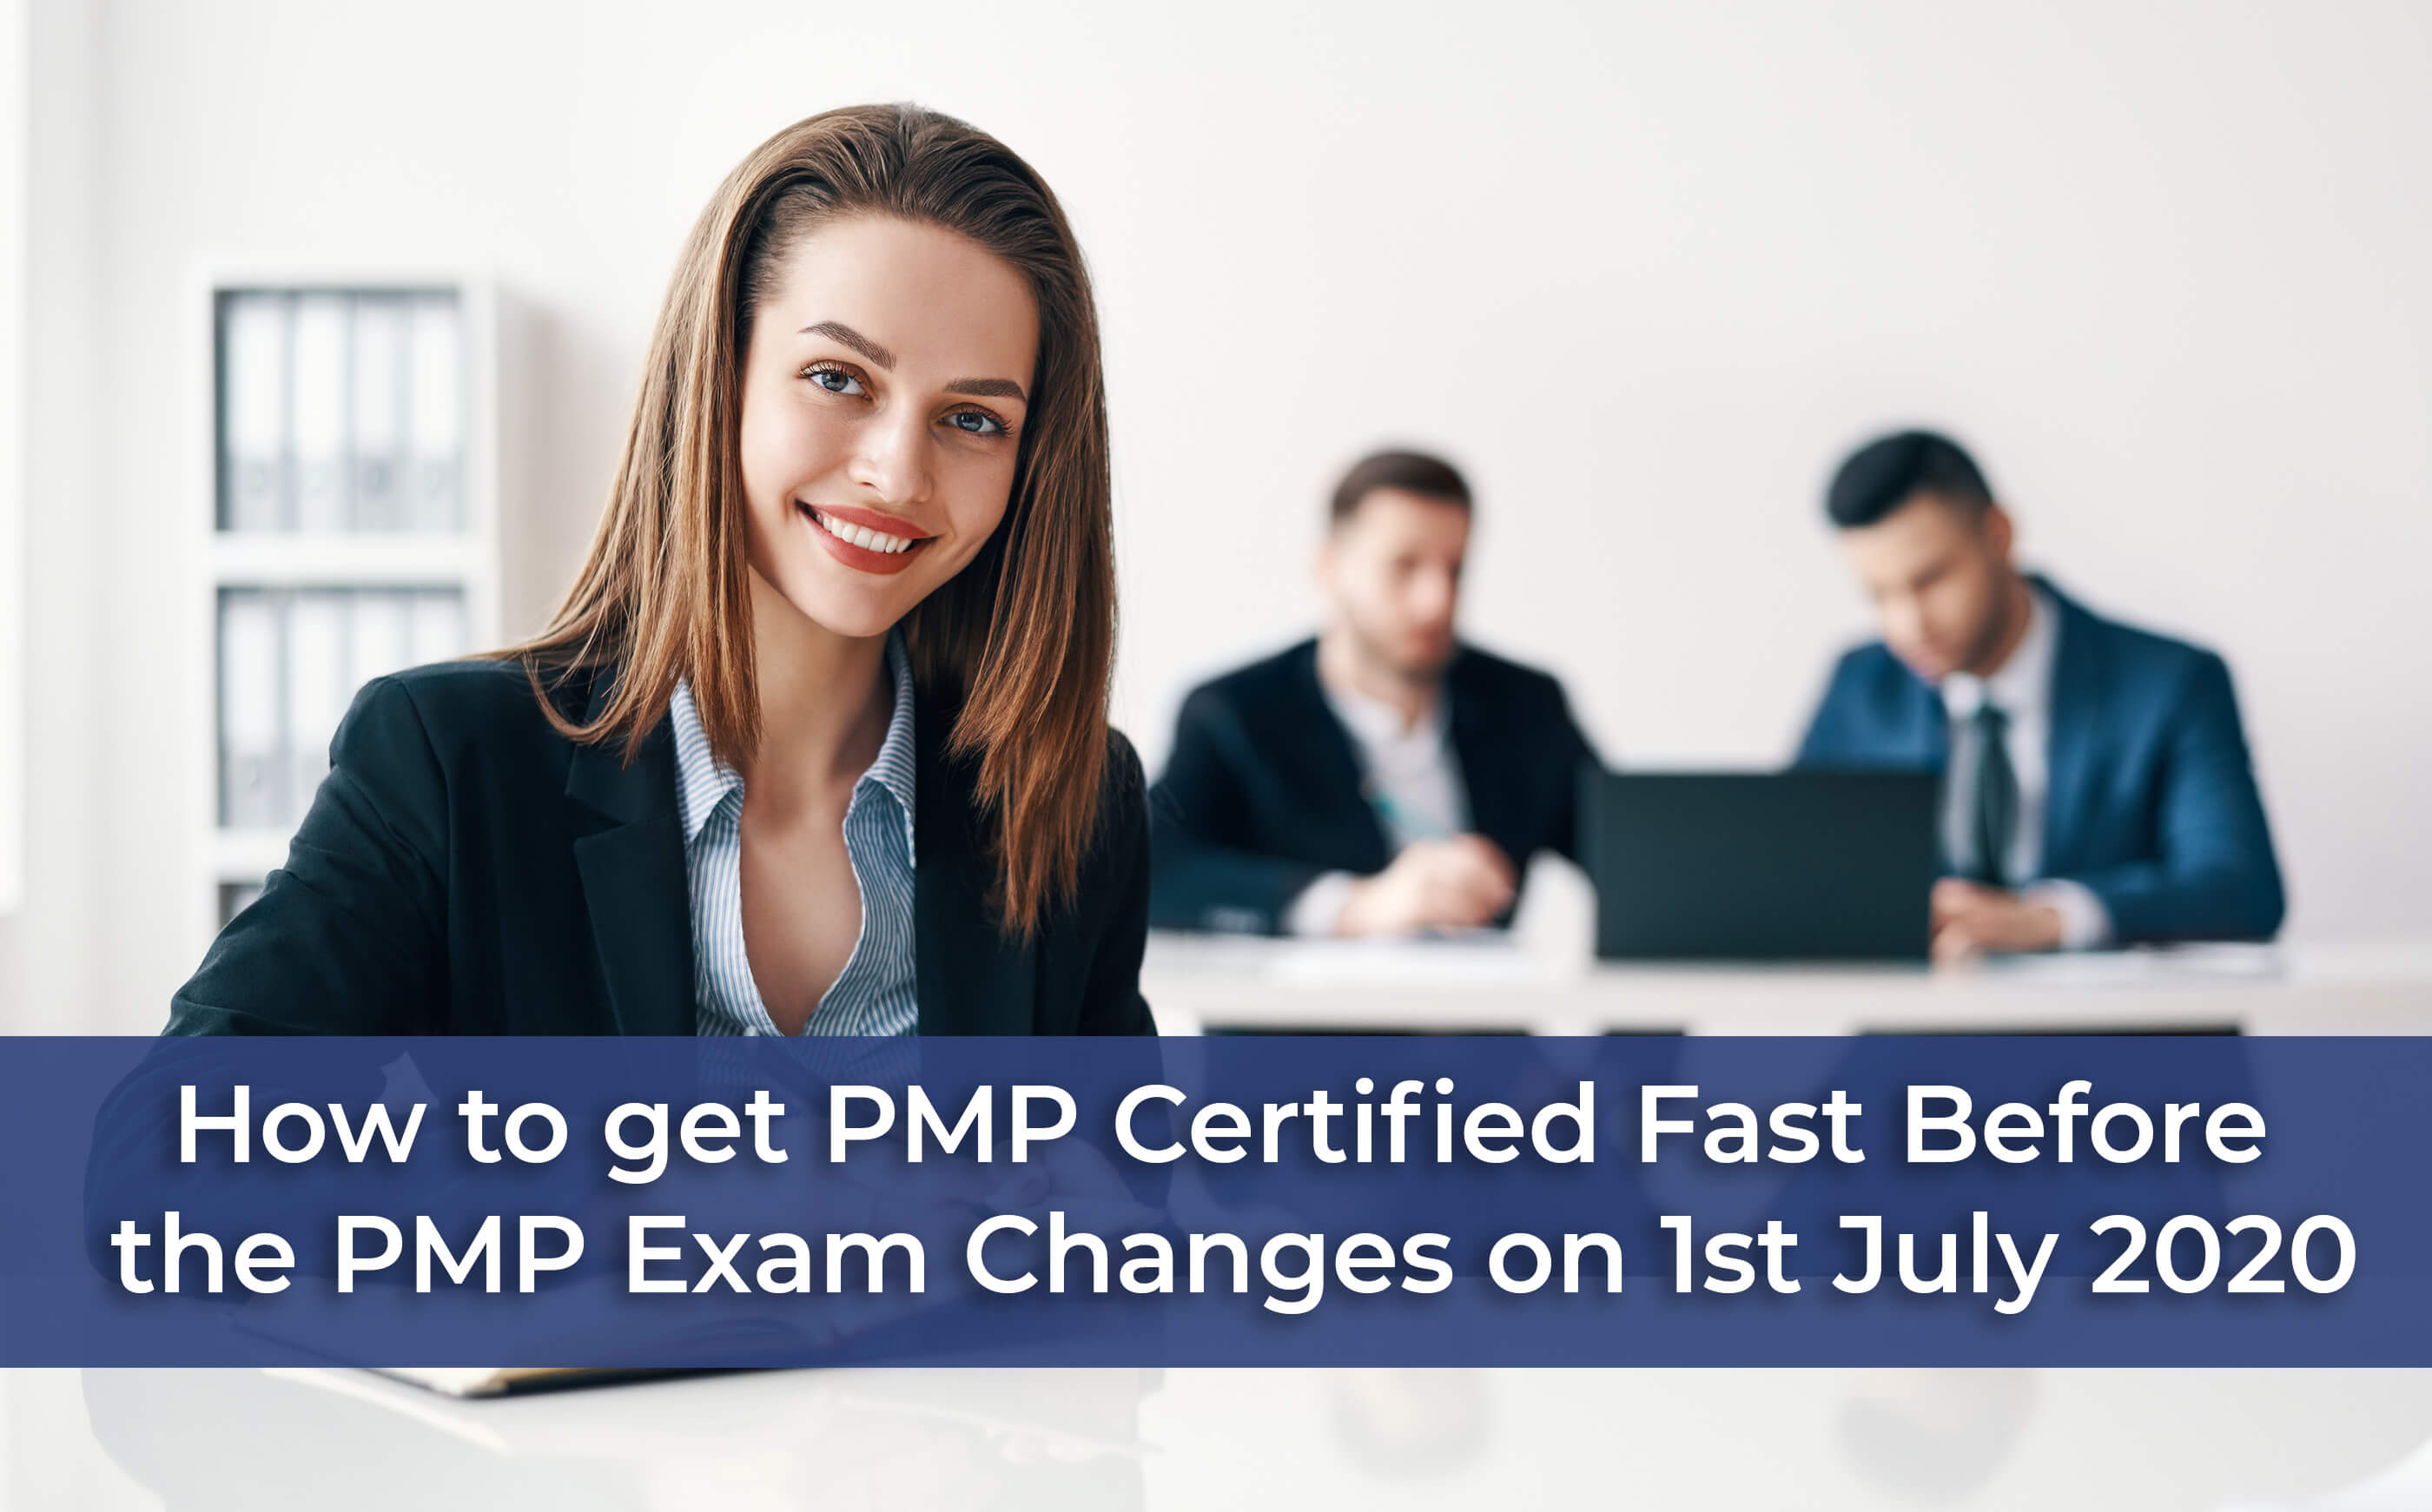 How to get PMP Certified Before the PMP® Exam Changes on 1st July 2020